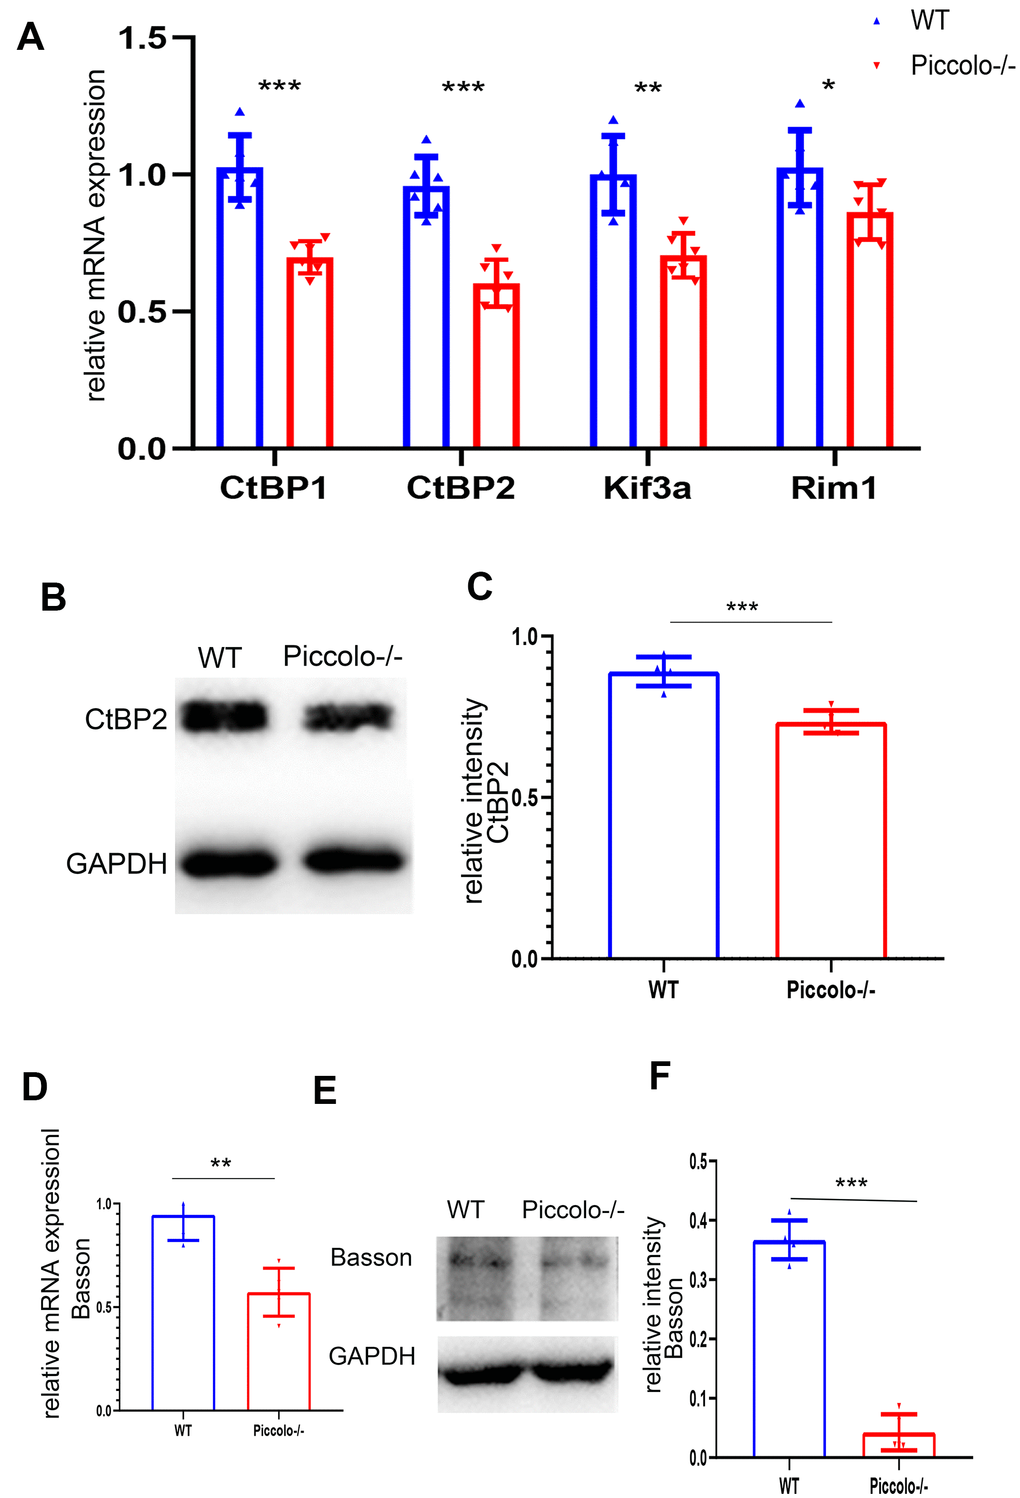 Expression levels of synaptic ribbon-related proteins in Piccolo-/- mice. (A) Relative mRNA levels of ribbon-related genes in Piccolo-/- and wild type (WT) mice. n=5. (B) Western blot analysis of CtBP2 in Piccolo-/- and WT mice (GADPH was used as the loading control.) n=5. (C) Relative CtBP2 band intensities normalized to GADPH. n=5. (D) Relative mRNA levels of Bassoon in Piccolo-/- and WT mice. n=5. (E) Western blot analysis of Bassoon in Piccolo-/- and WT mice. (GADPH was used as the loading control.) n=5. (F) Relative Bassoon band intensities normalized to GADPH. Data represent the means ± SD. **P 